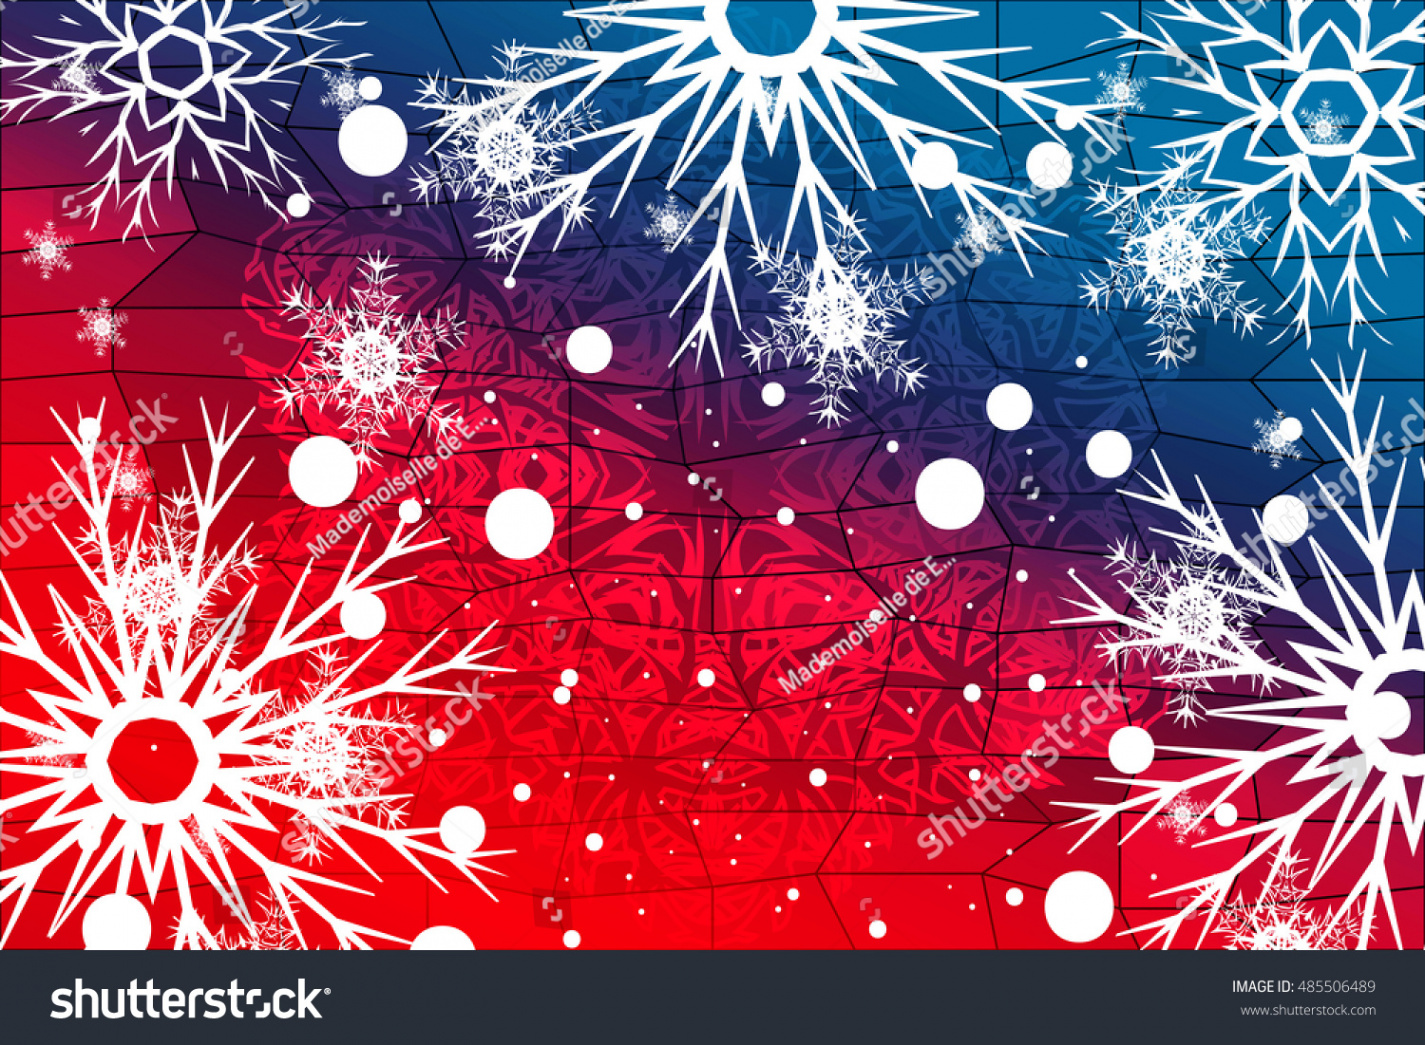 Blue Red Christmas Background Snowflakes Christmas Stock Vector